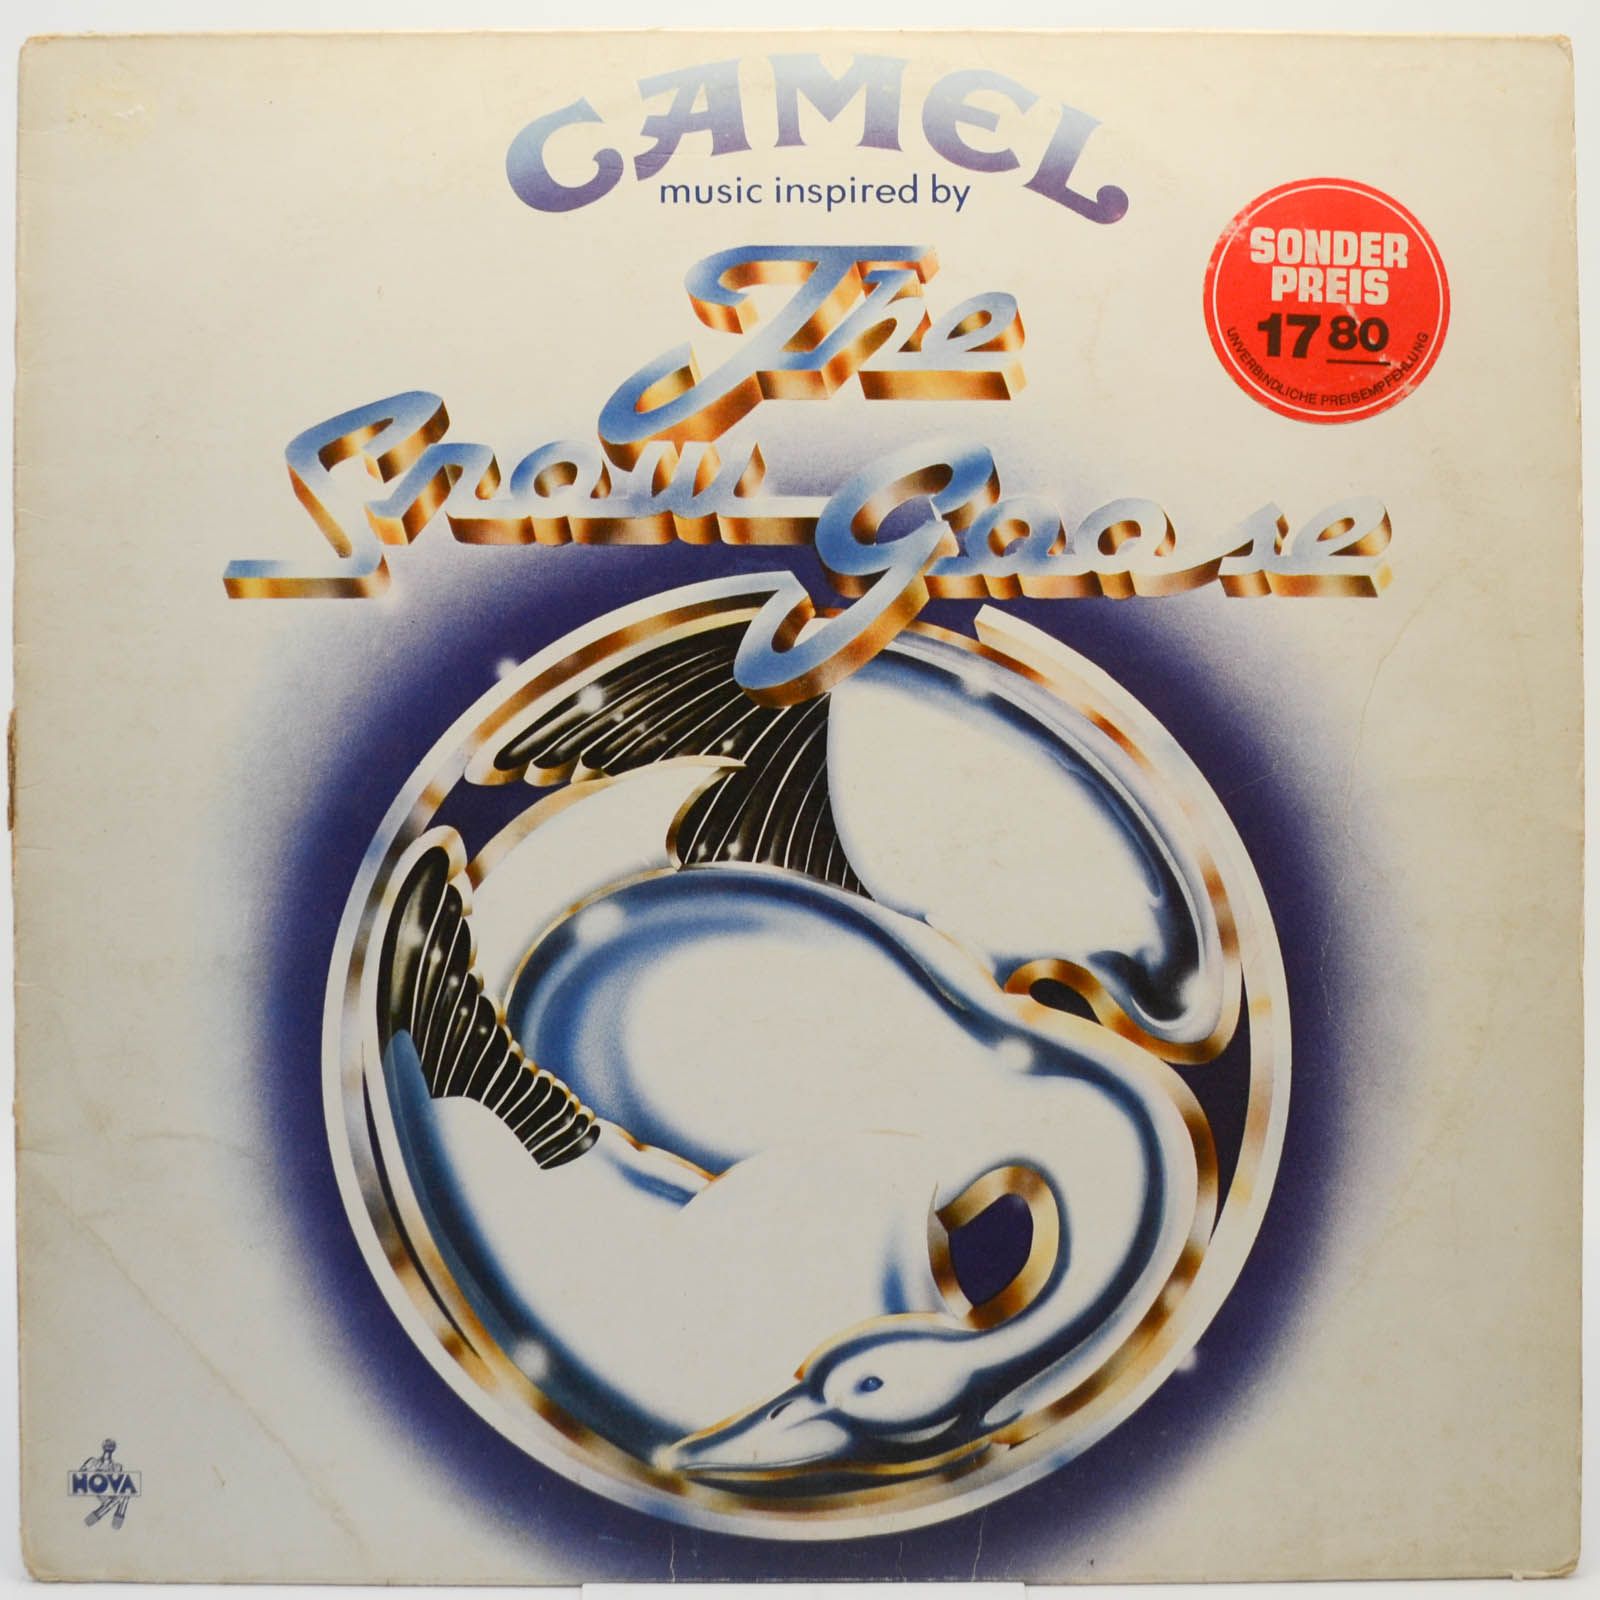 Camel — Music Inspired By The Snow Goose, 1975